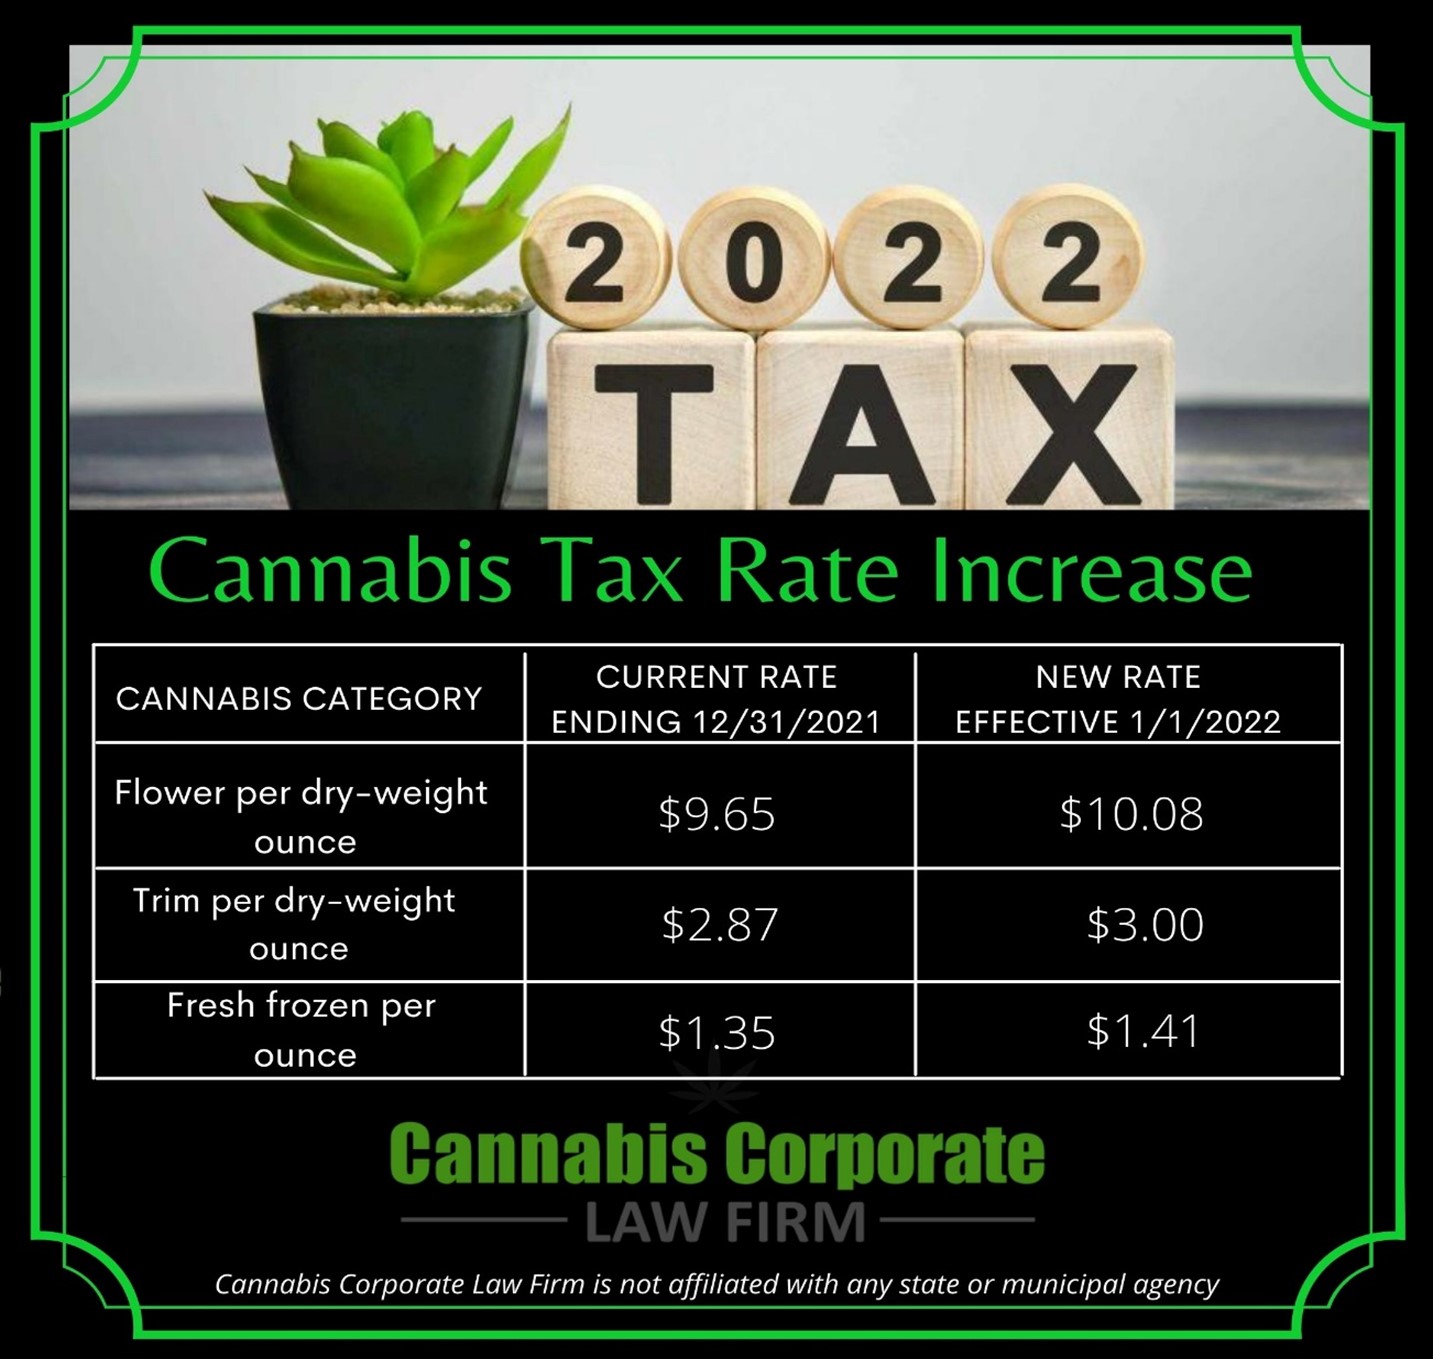 Cannabis Cultivation Tax Rate Increases in California 2022 by Dana Cisneros